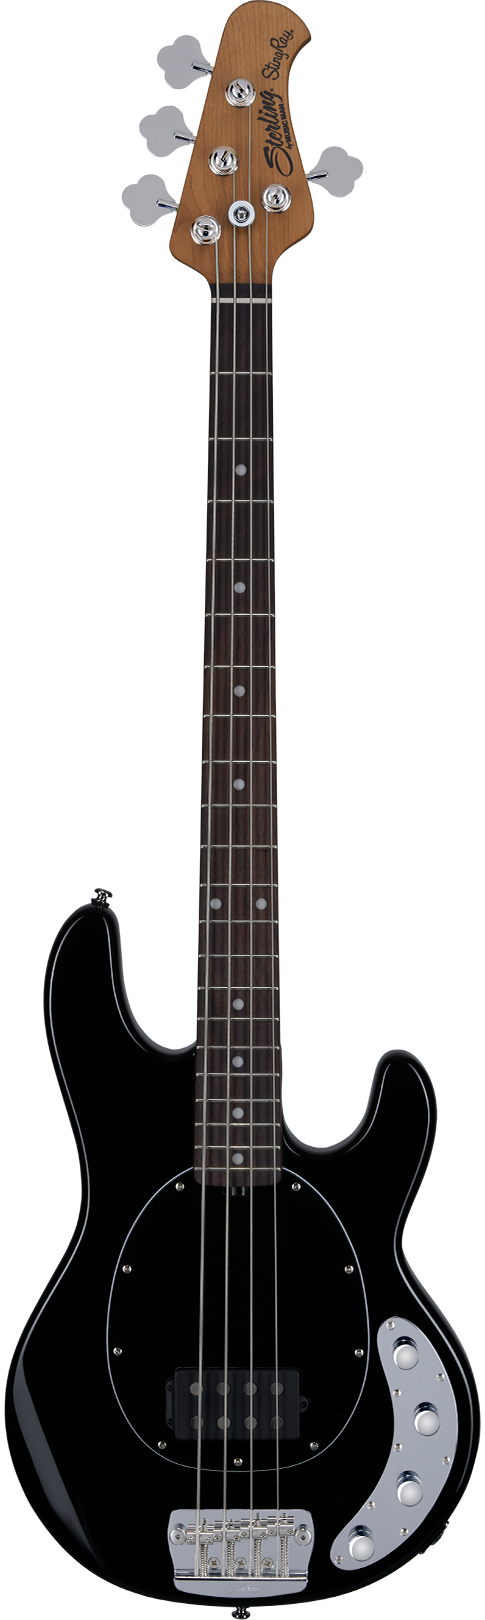 STERLING STINGRAY4 RAY34 - BLACK COLOR, STERLING, BASS GUITAR, sterling-bass-guitar-ray34-bk, ZOSO MUSIC SDN BHD